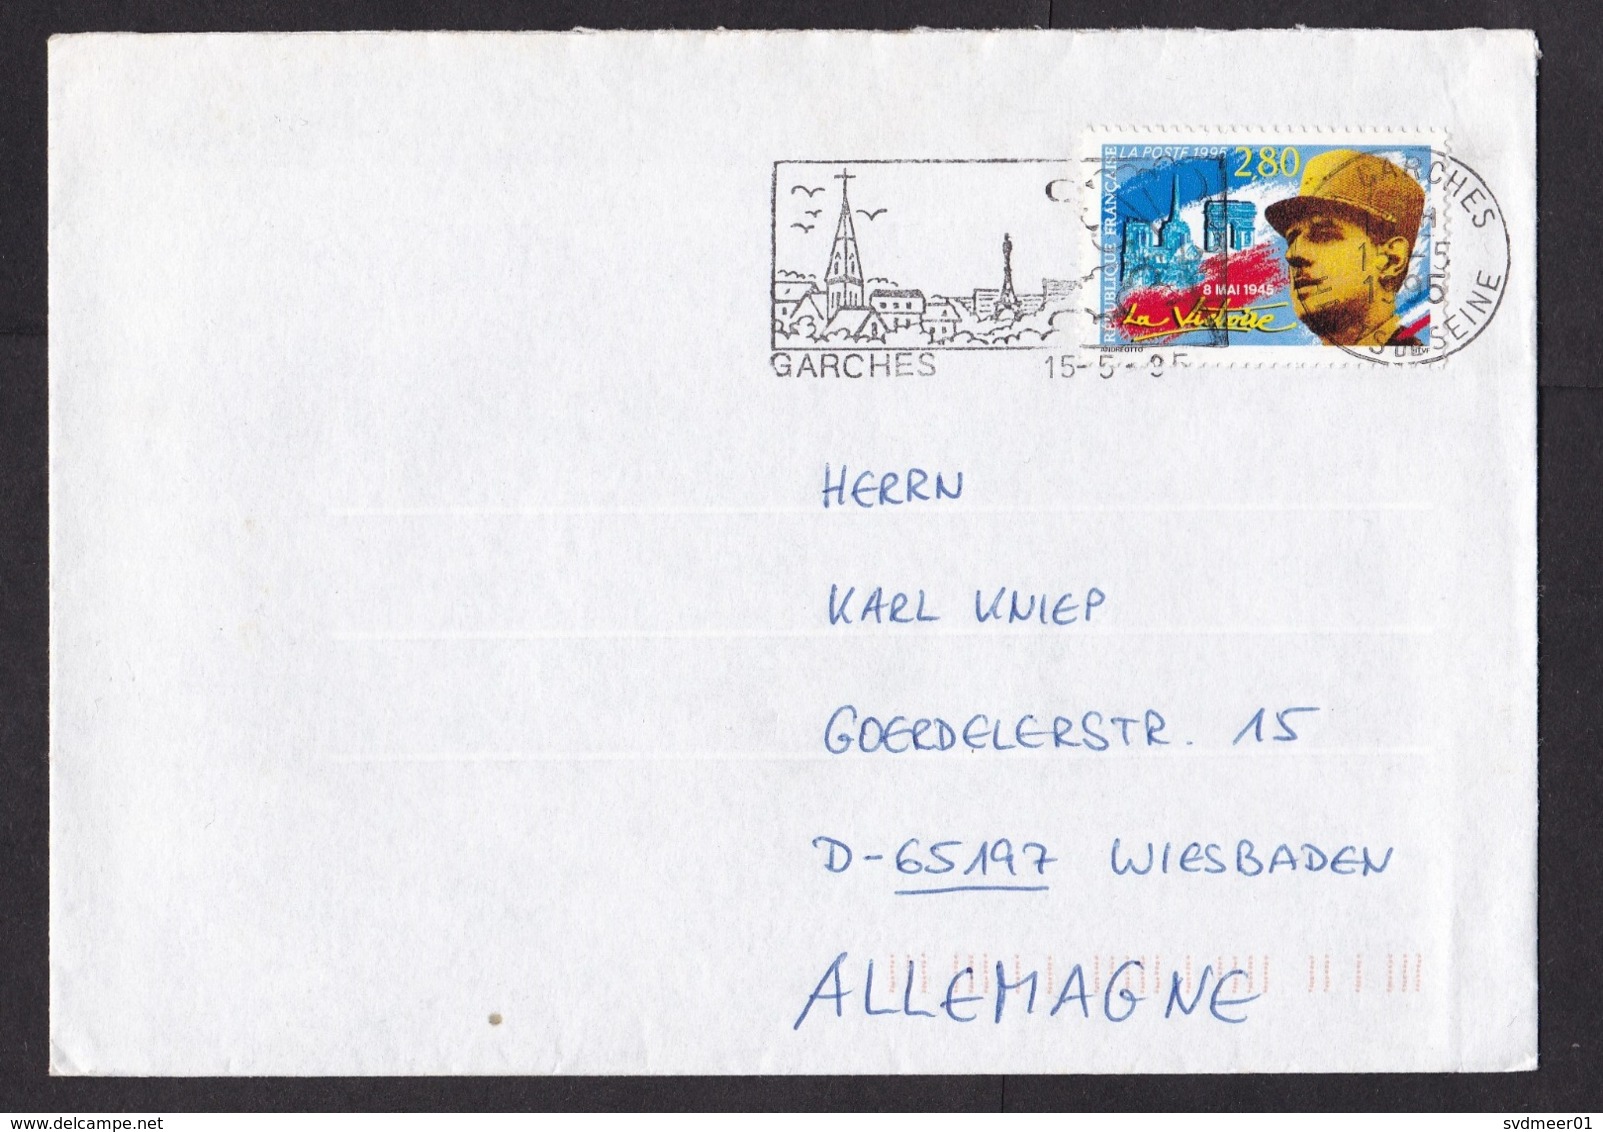 France: Cover To Germany, 1995, 1 Stamp, End Of Second World War, General Charles De Gaulle (traces Of Use) - Brieven En Documenten